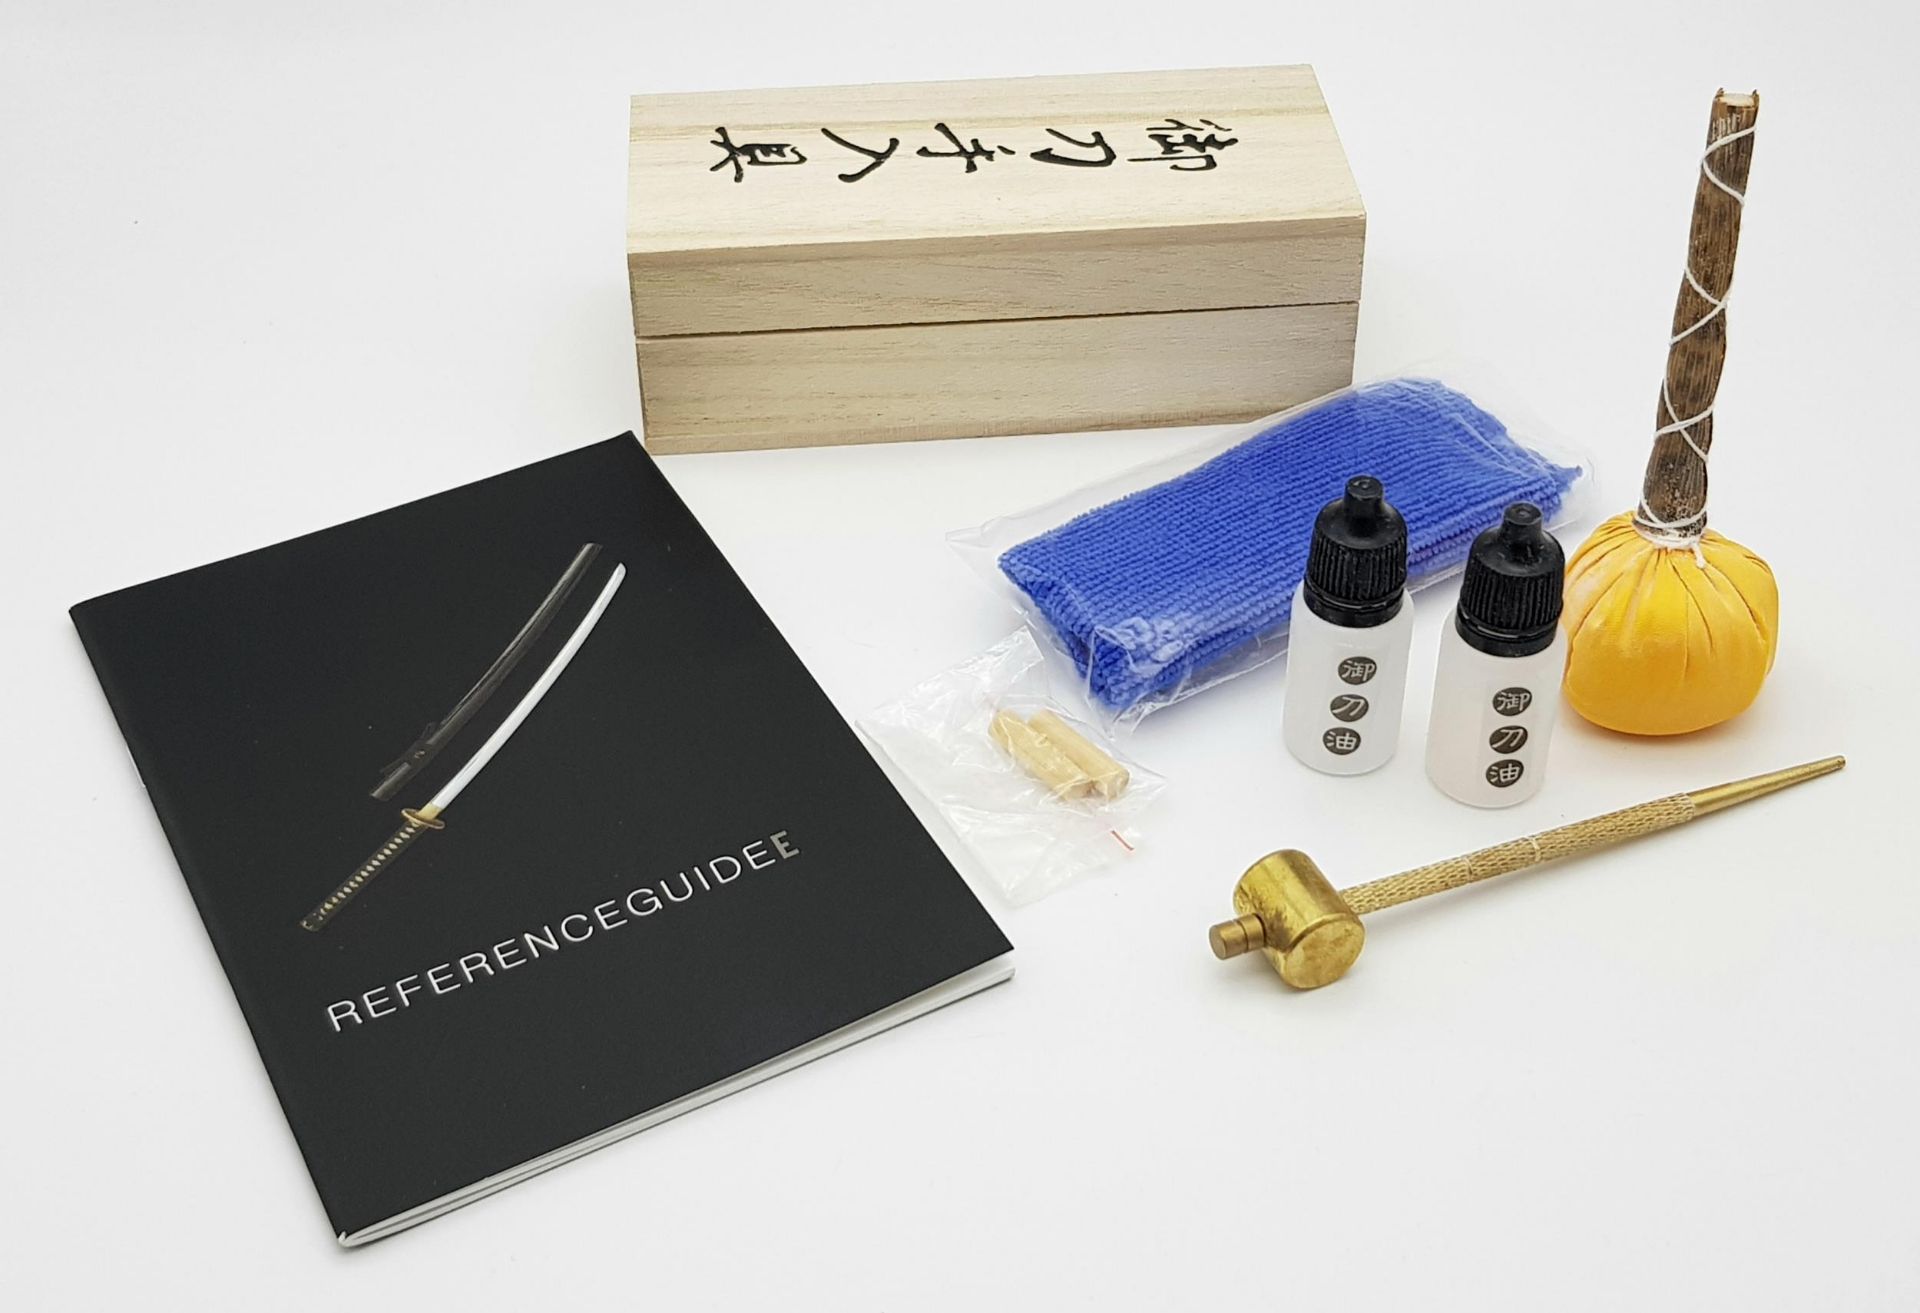 An Unused Japanese Samurai Sword Cleaning and Maintenance Boxed Set. Contains Oils, Powders Cloths